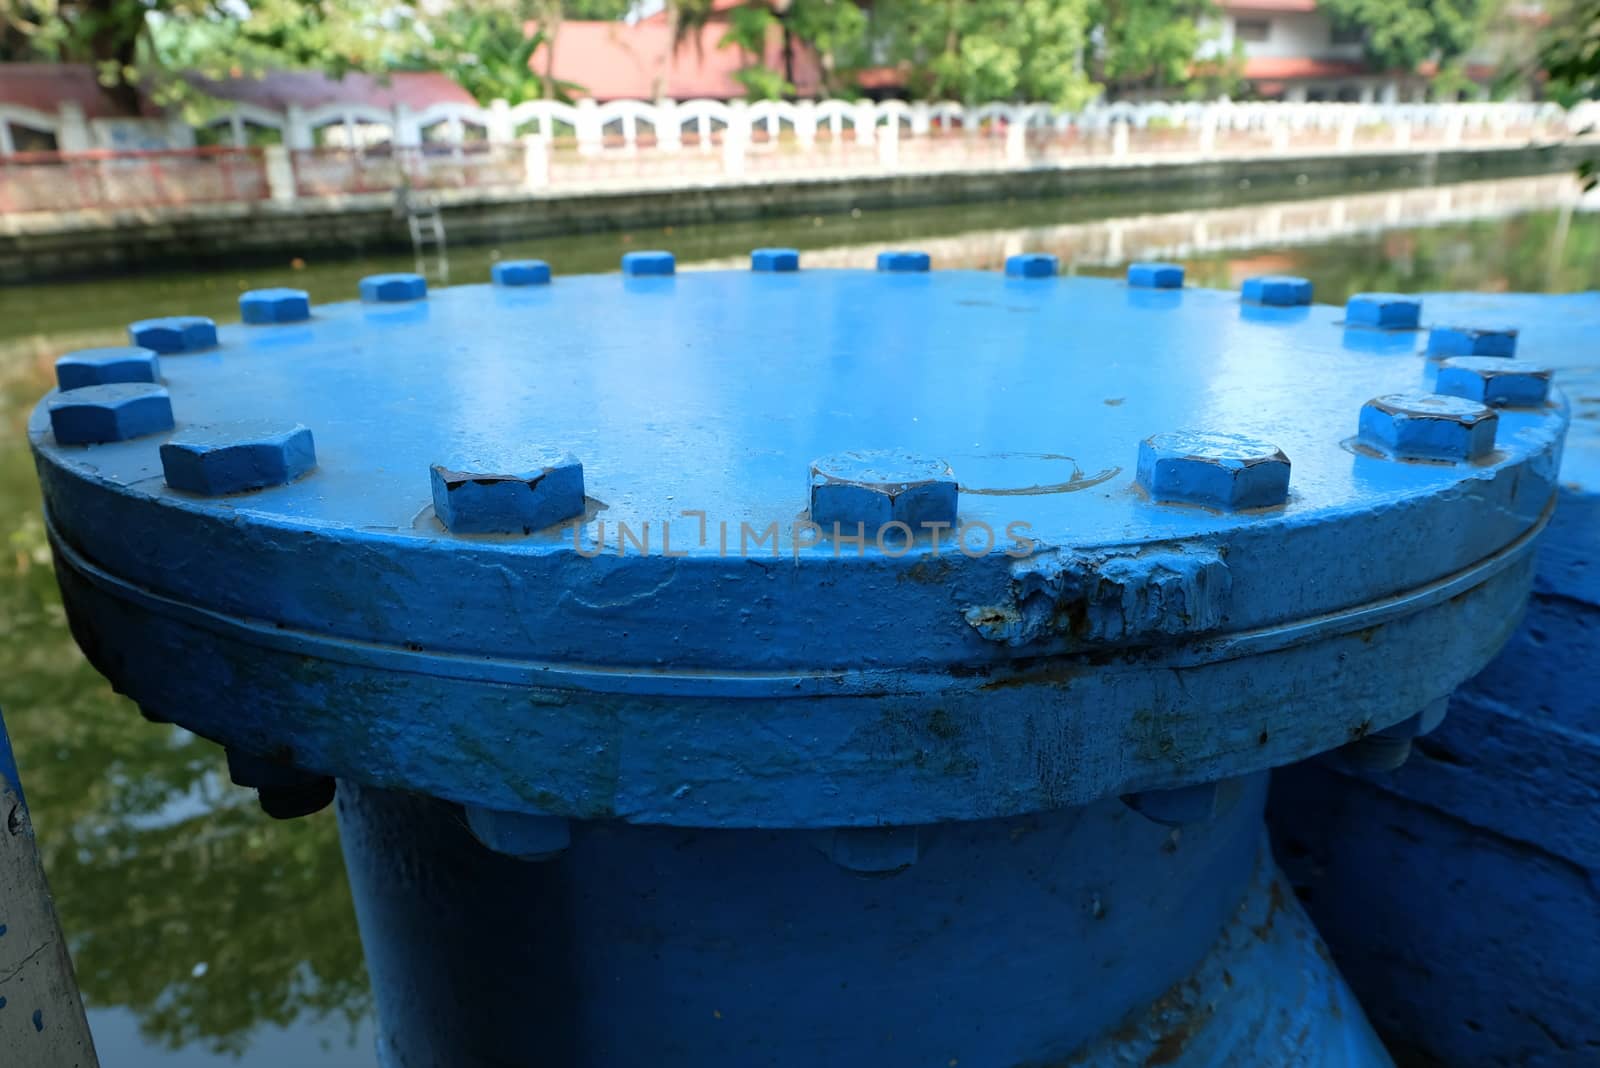 Old Big Blue Water Pipe. by mesamong